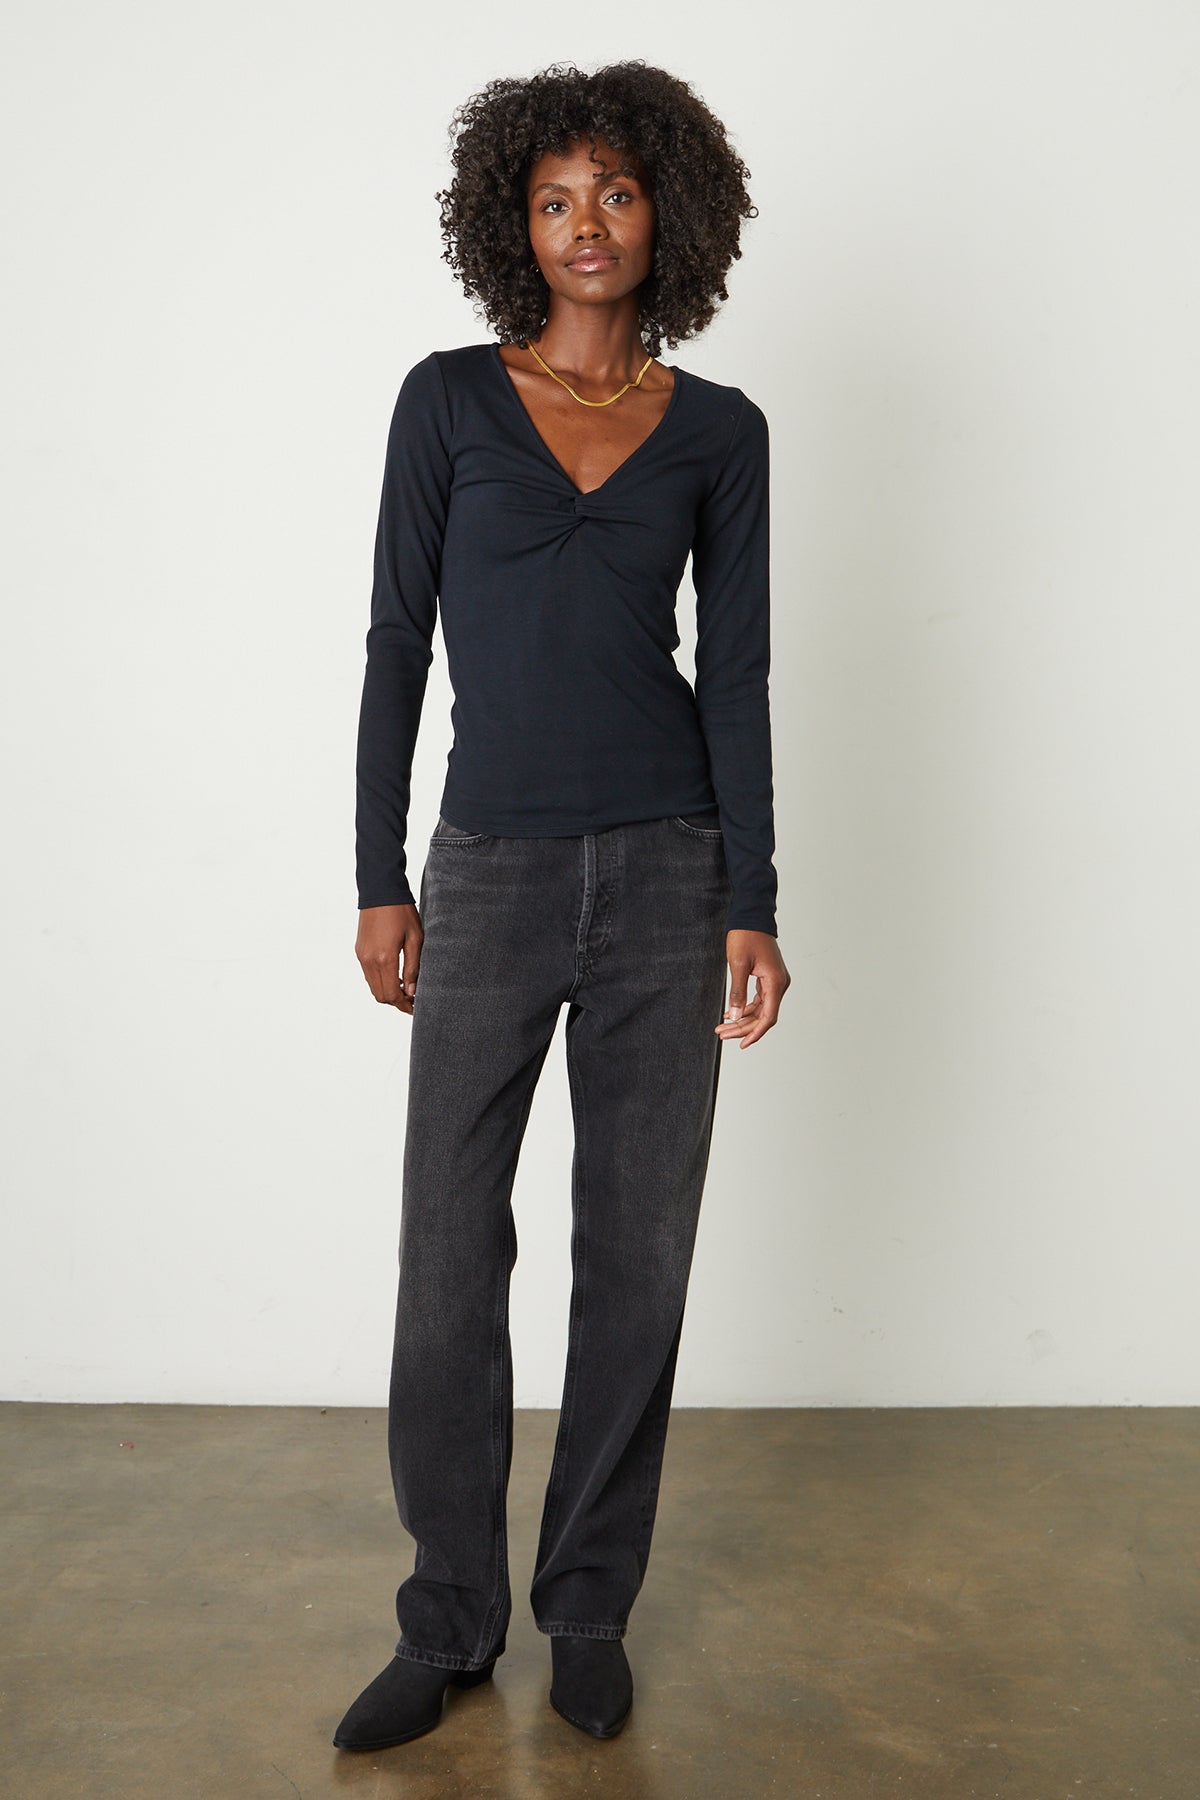   Brandi Viscose Rib V-Neck Top in jet black with black denim, boots, and gold necklace, full length front 